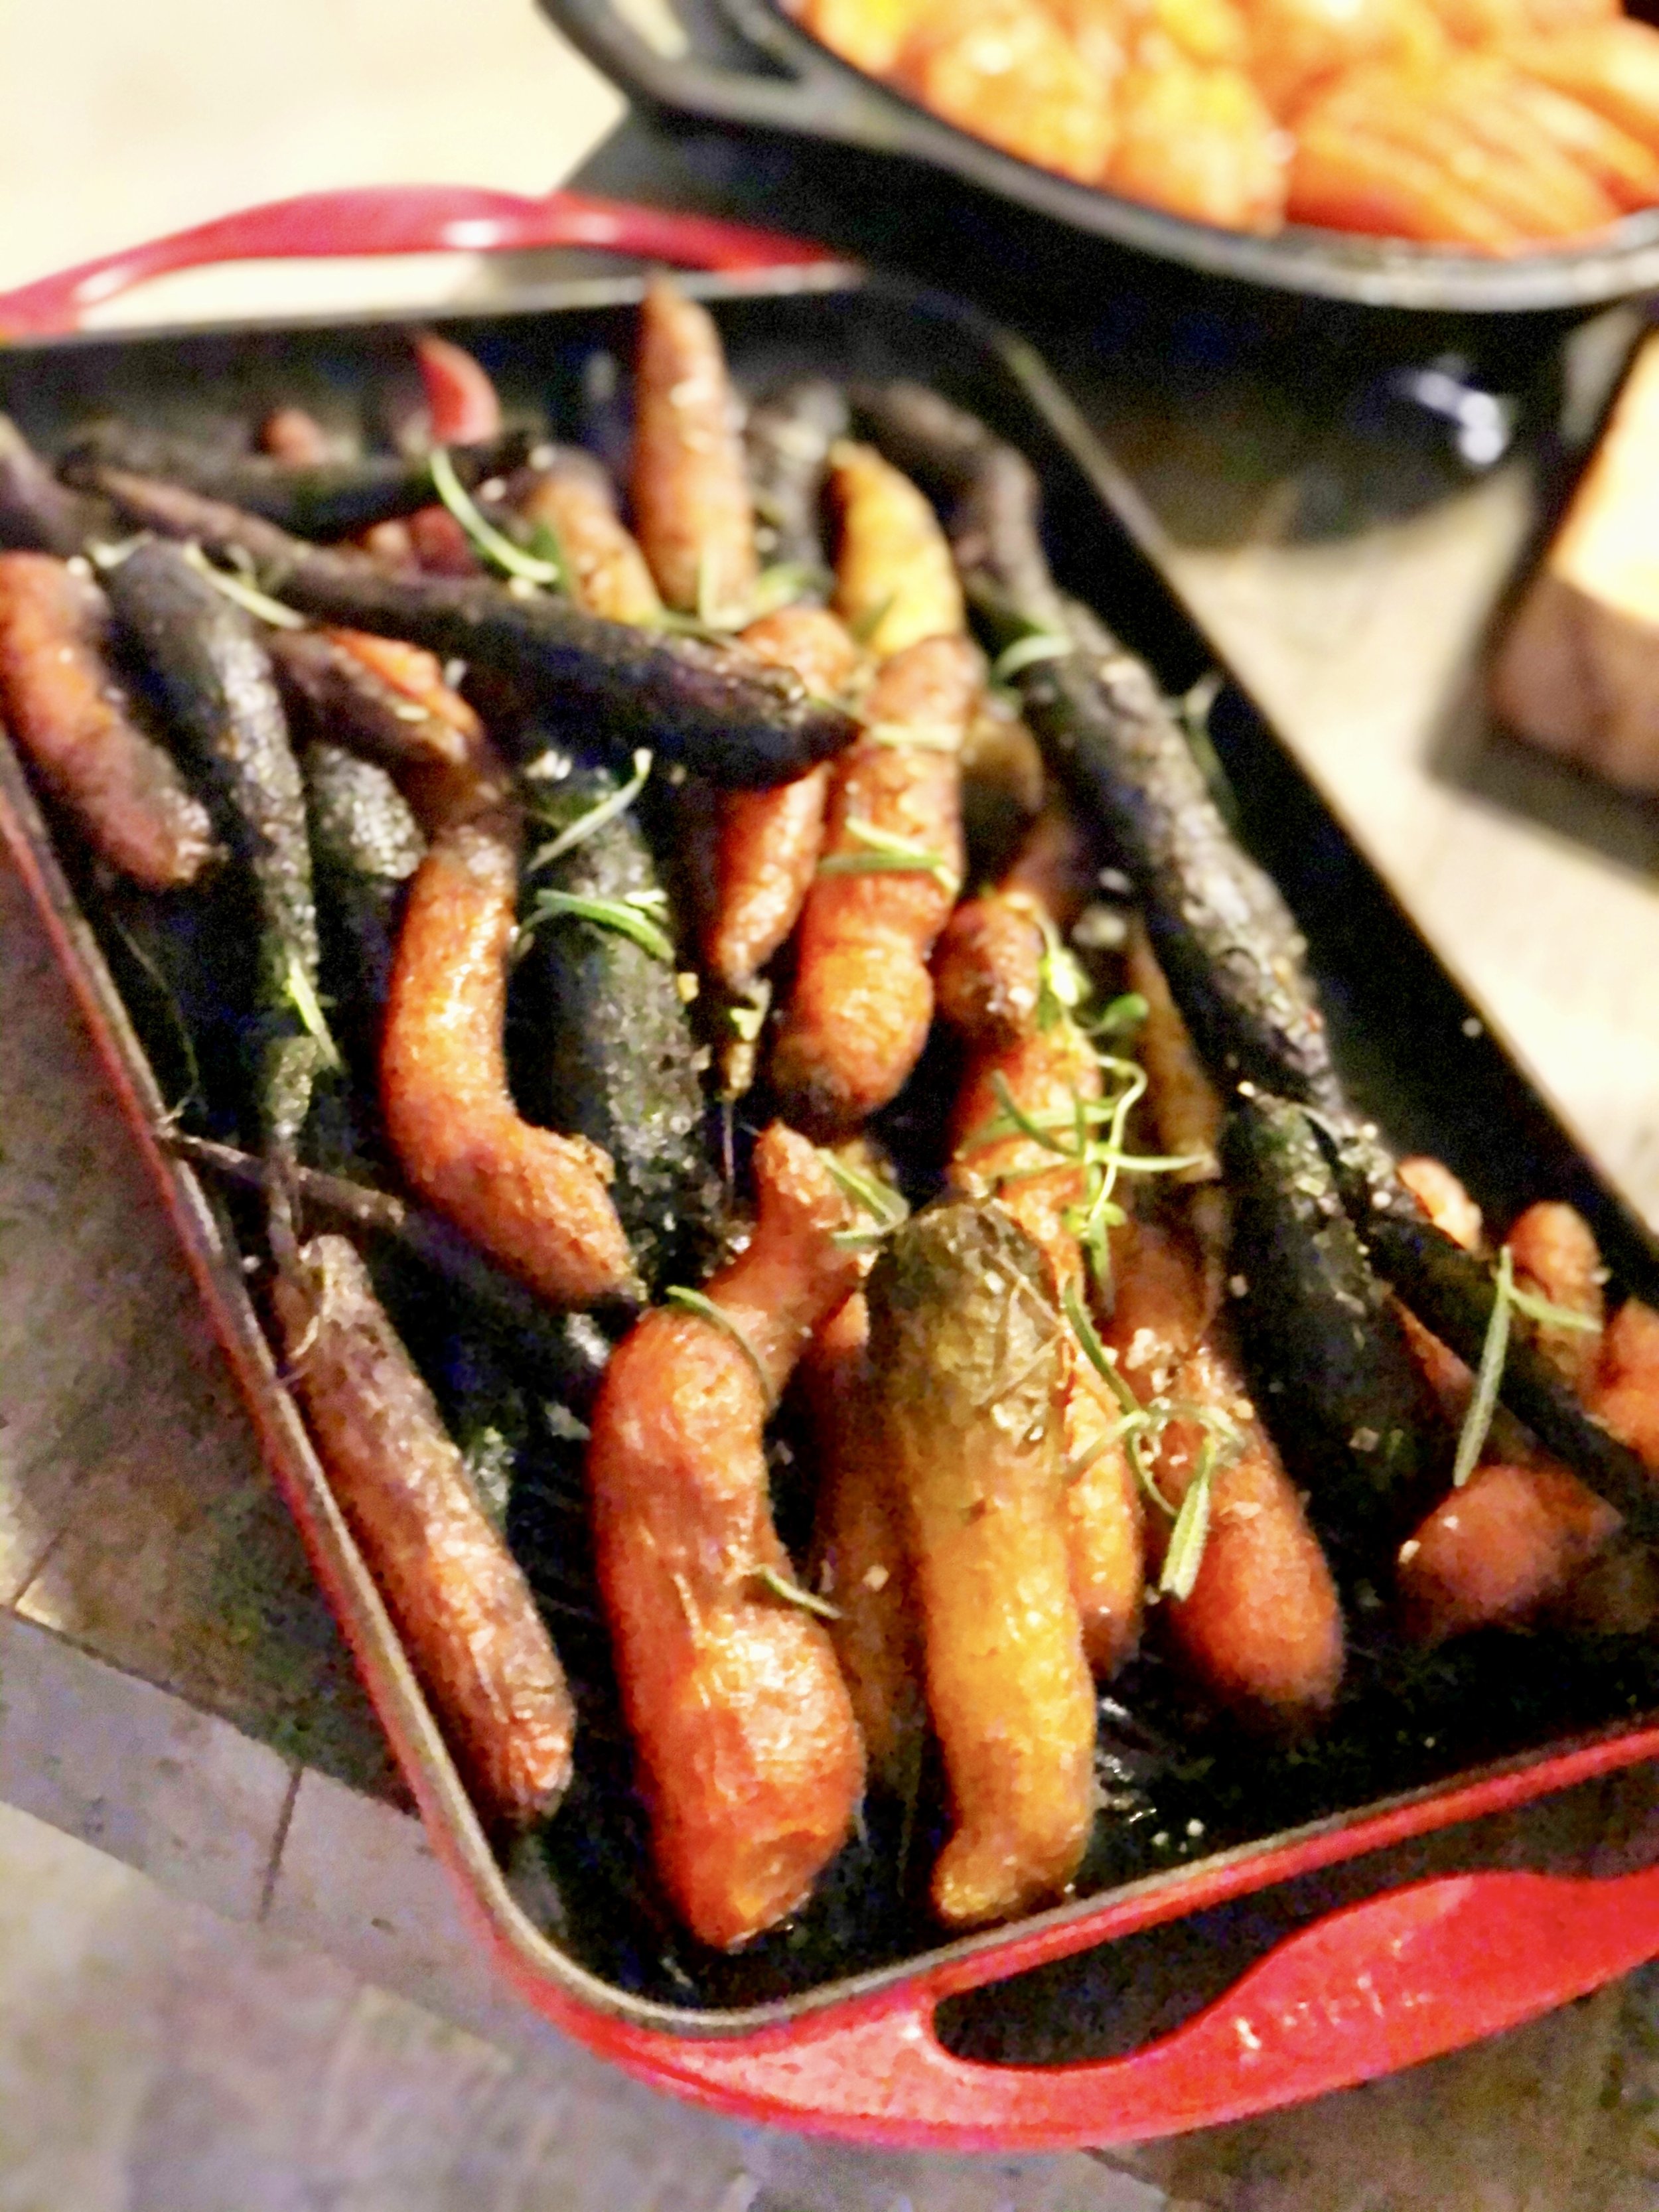 Roasted Tri color carrots 